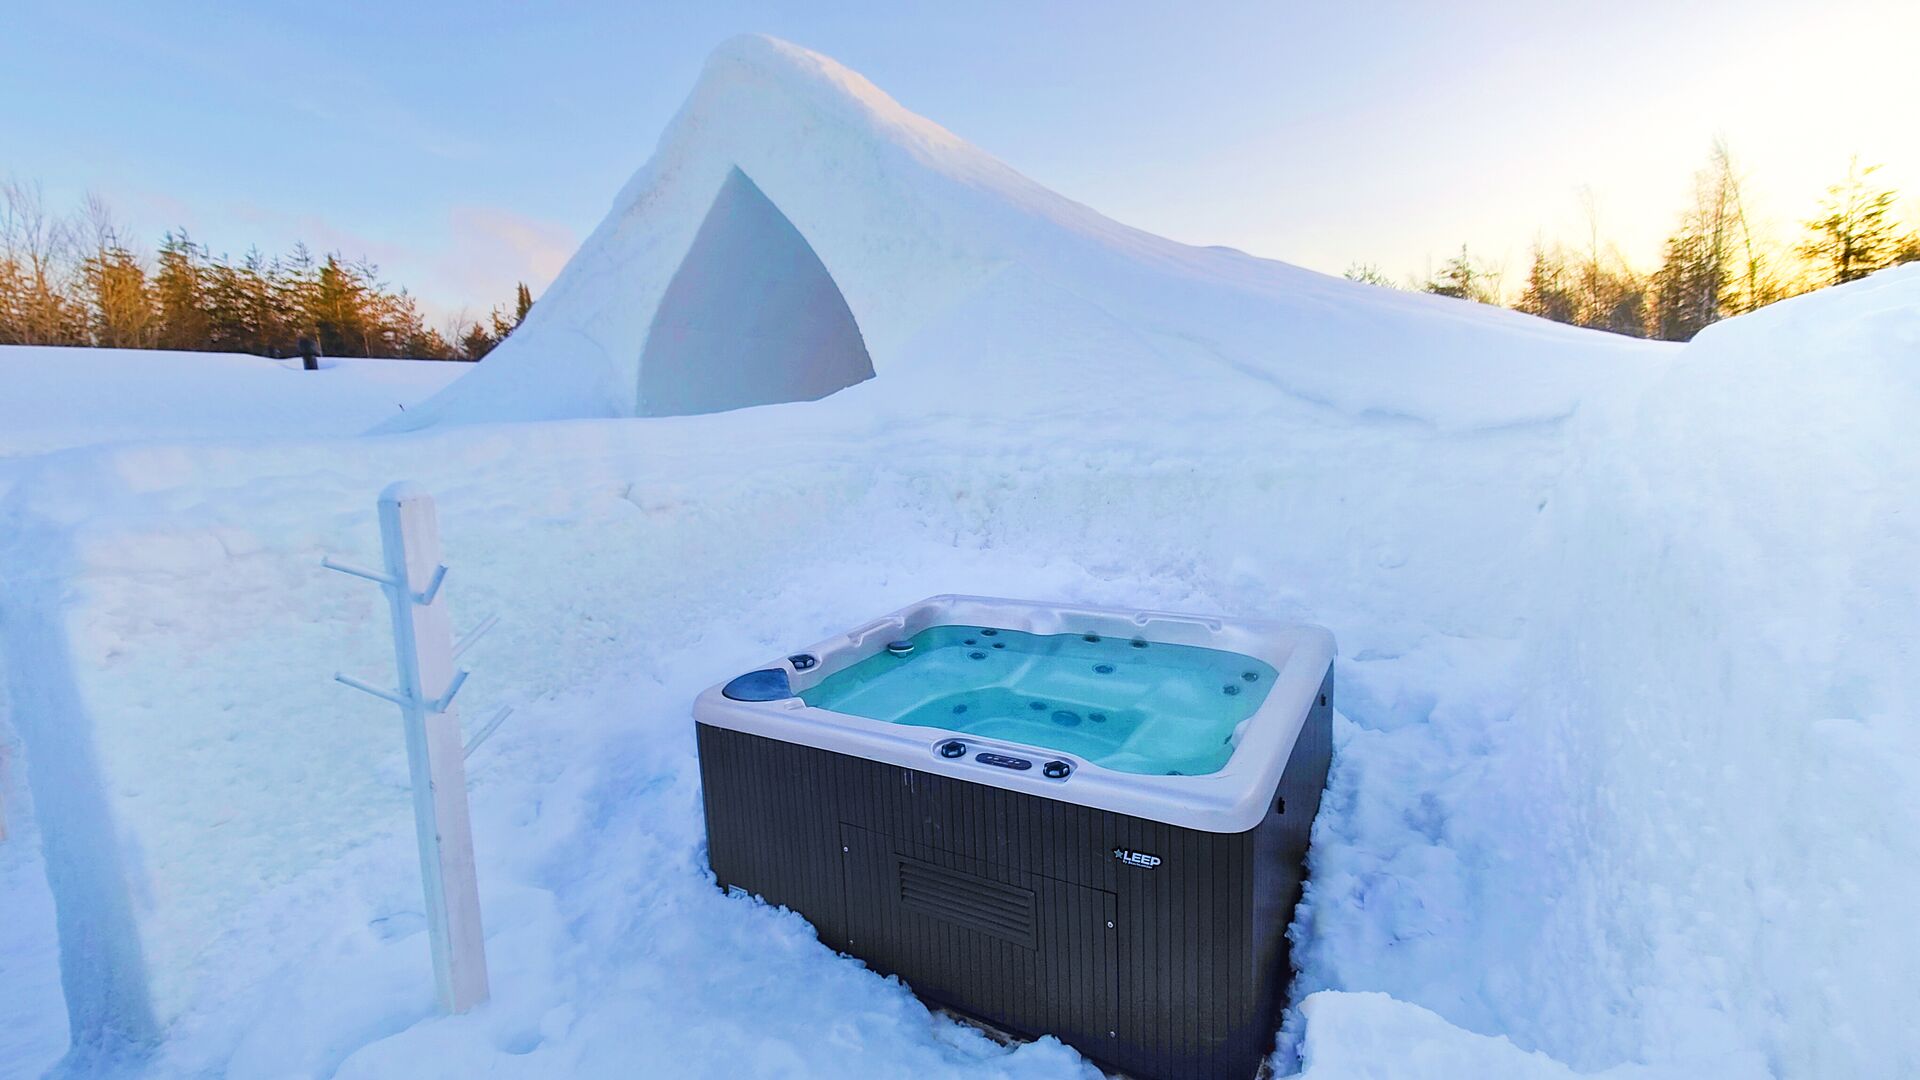 Jacuzzi at the SnowHotel spa ©Arctic SnowHotel & Glass Igloos